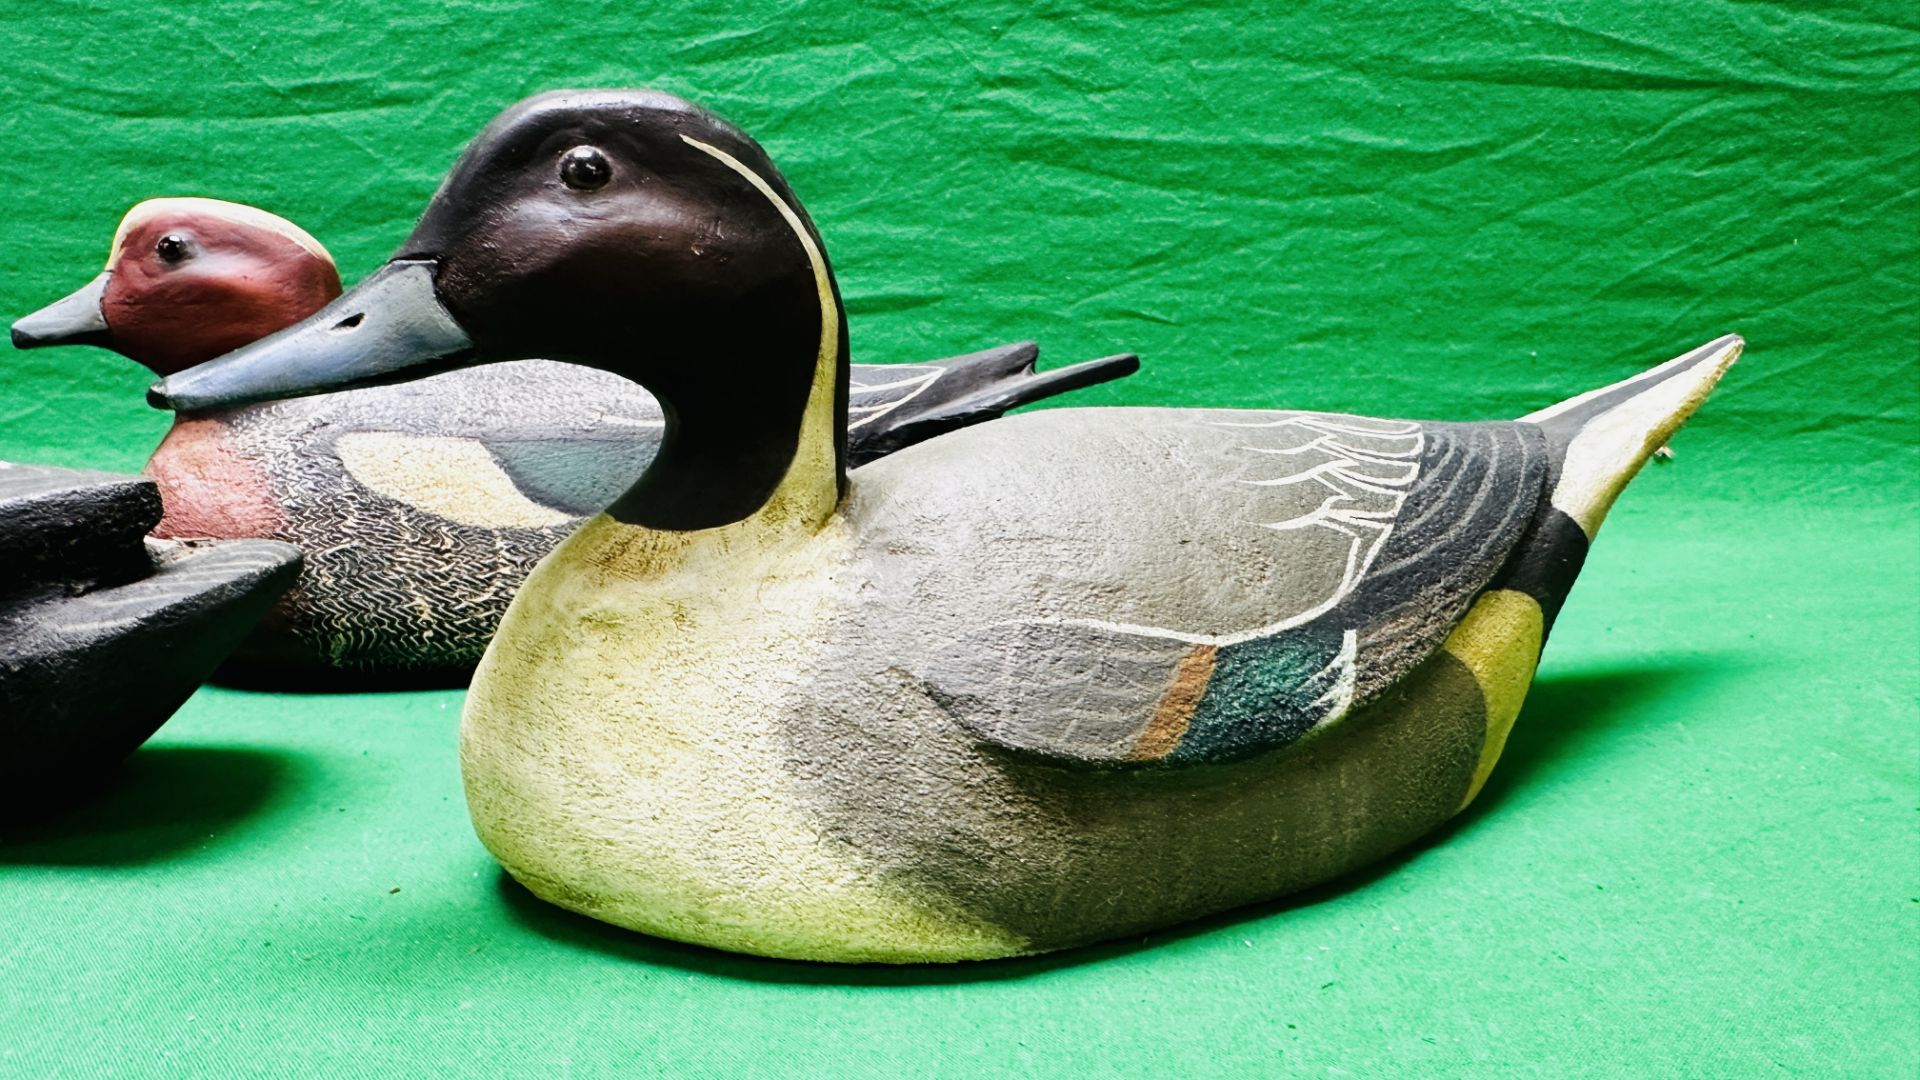 A HANDCRAFTED SET OF 4 DUCK DECOYS HAVING HANDPAINTED DETAIL AND GLASS EYES. - Image 3 of 13